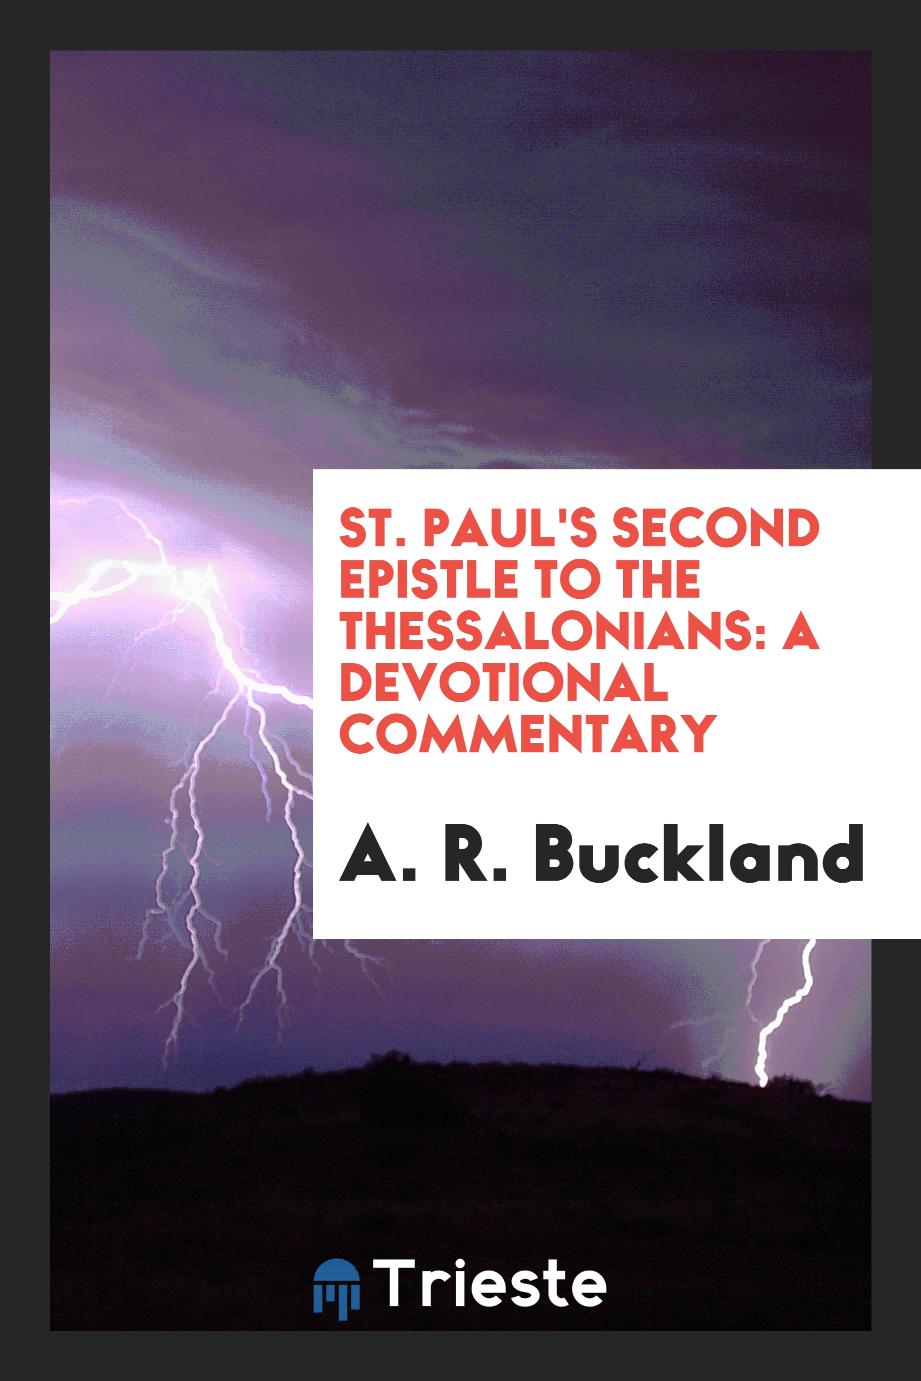 St. Paul's Second epistle to the Thessalonians: a devotional commentary